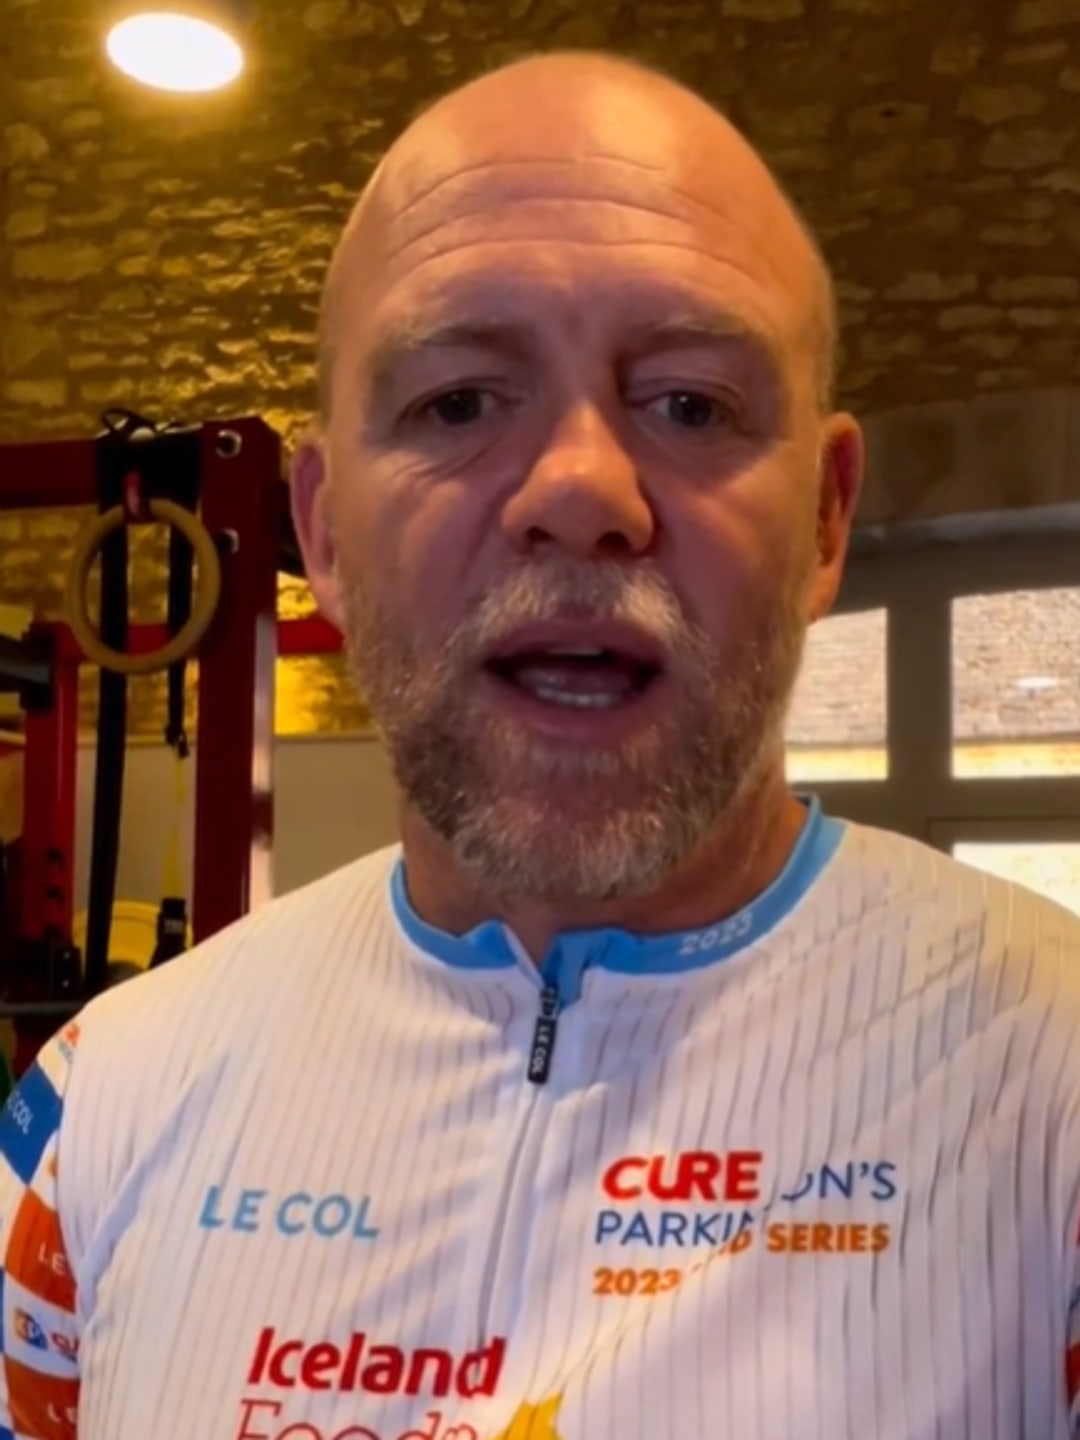 Mike Tindall filmed a video inside their at-home gym